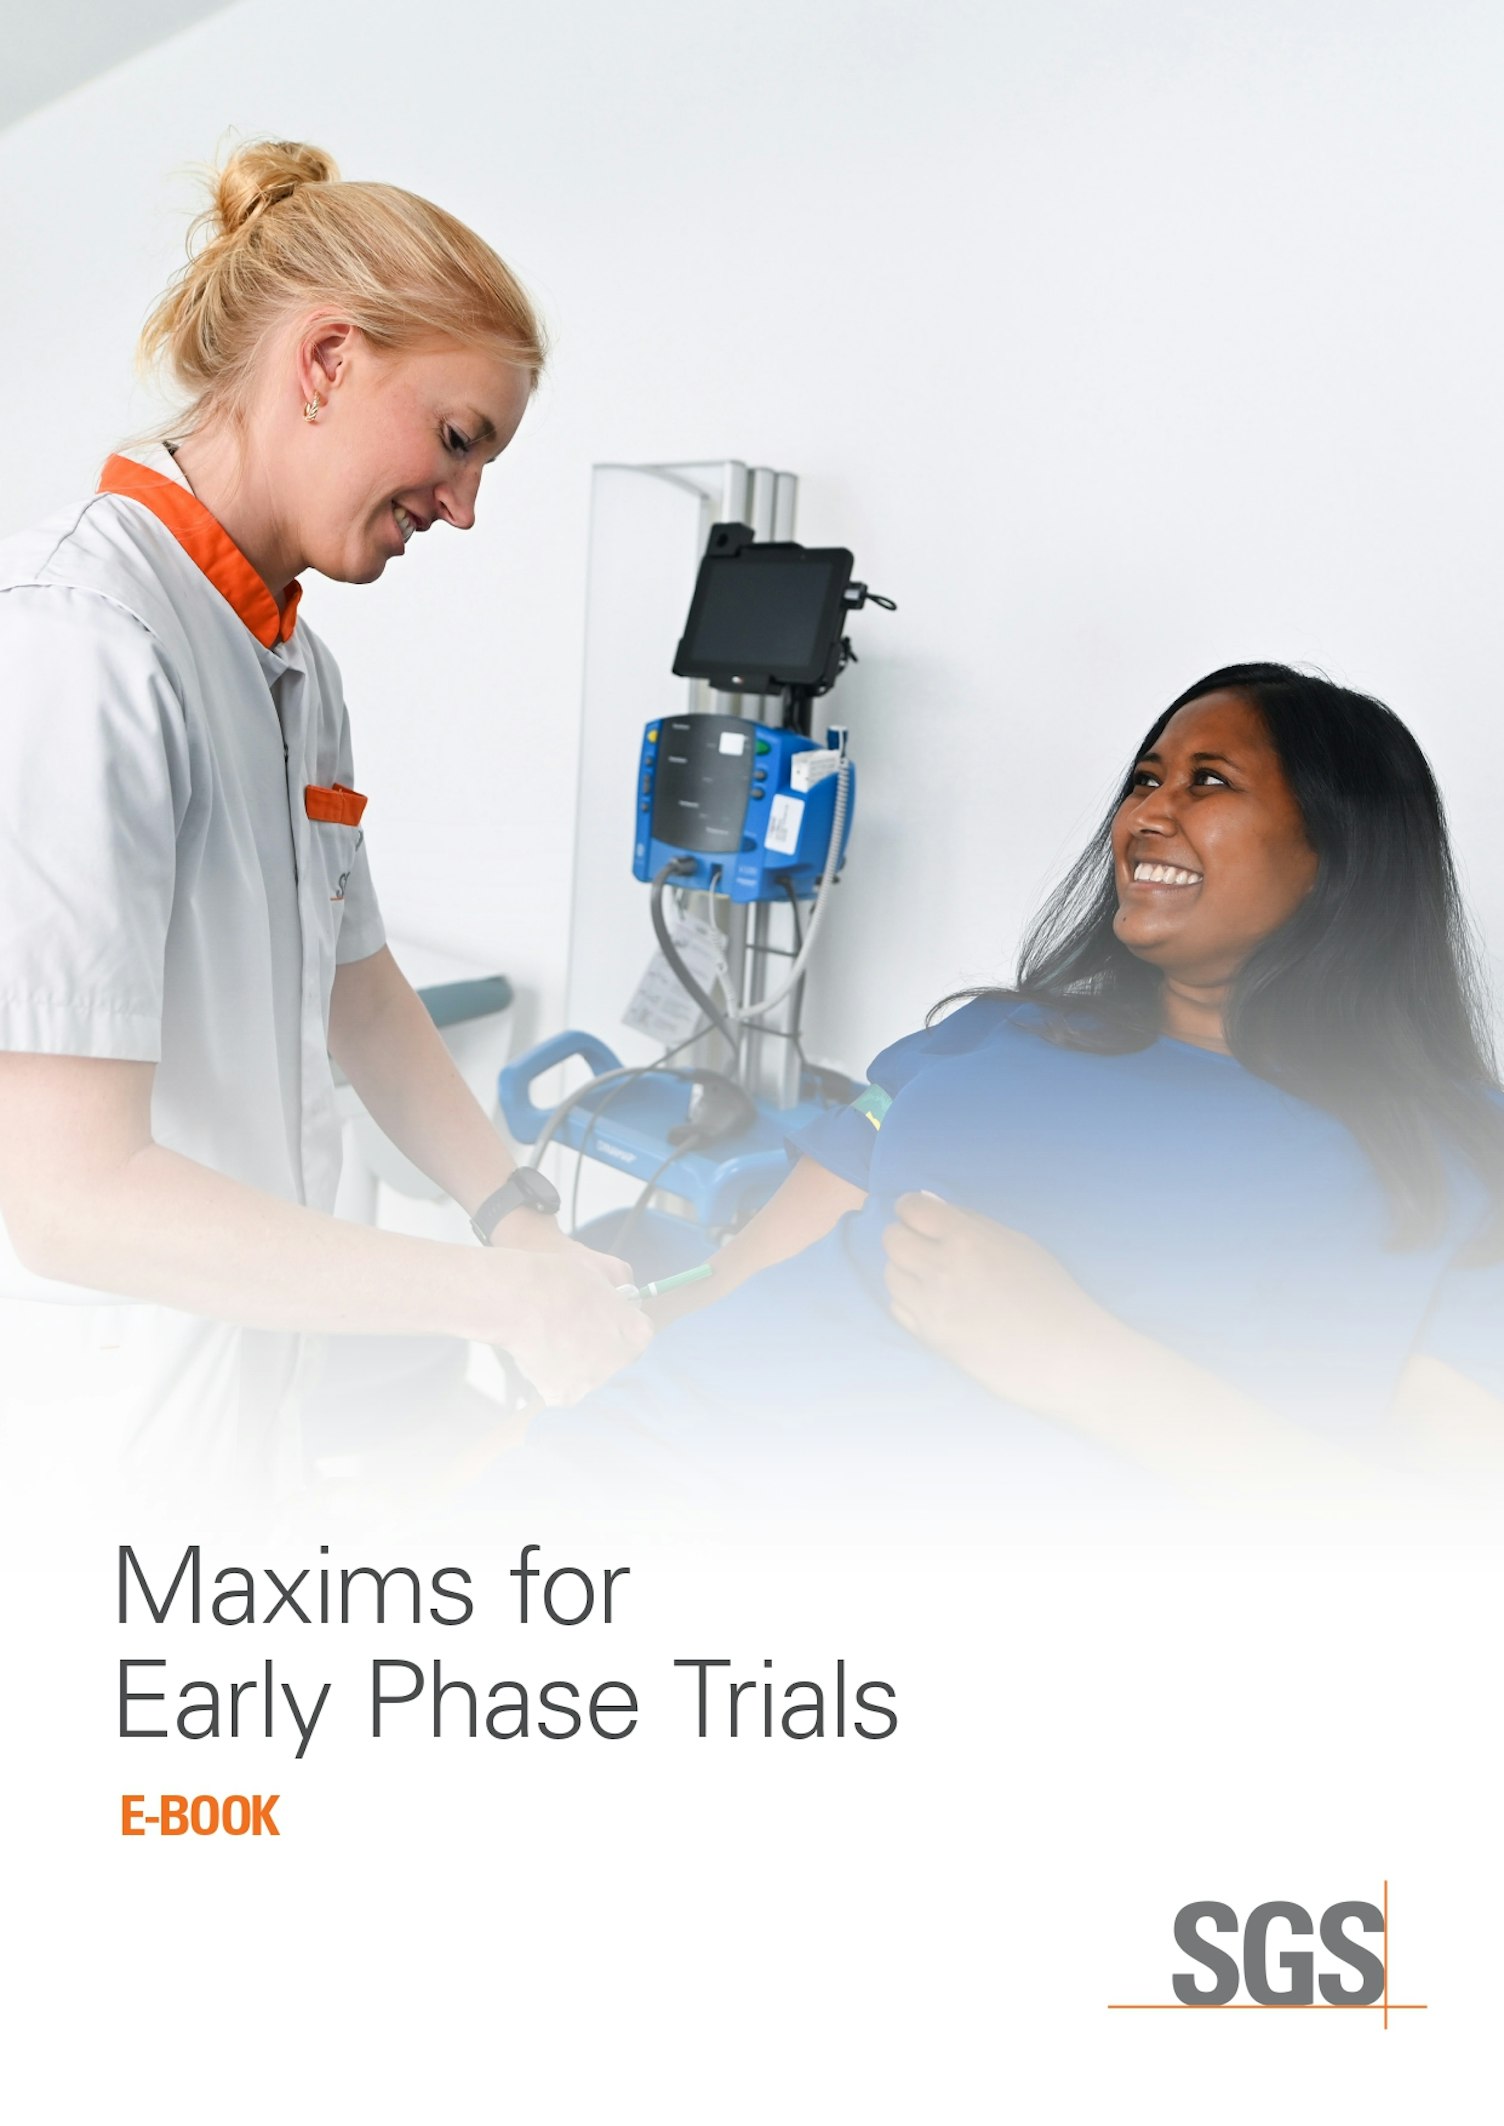 Maxims for Early Phase Trials